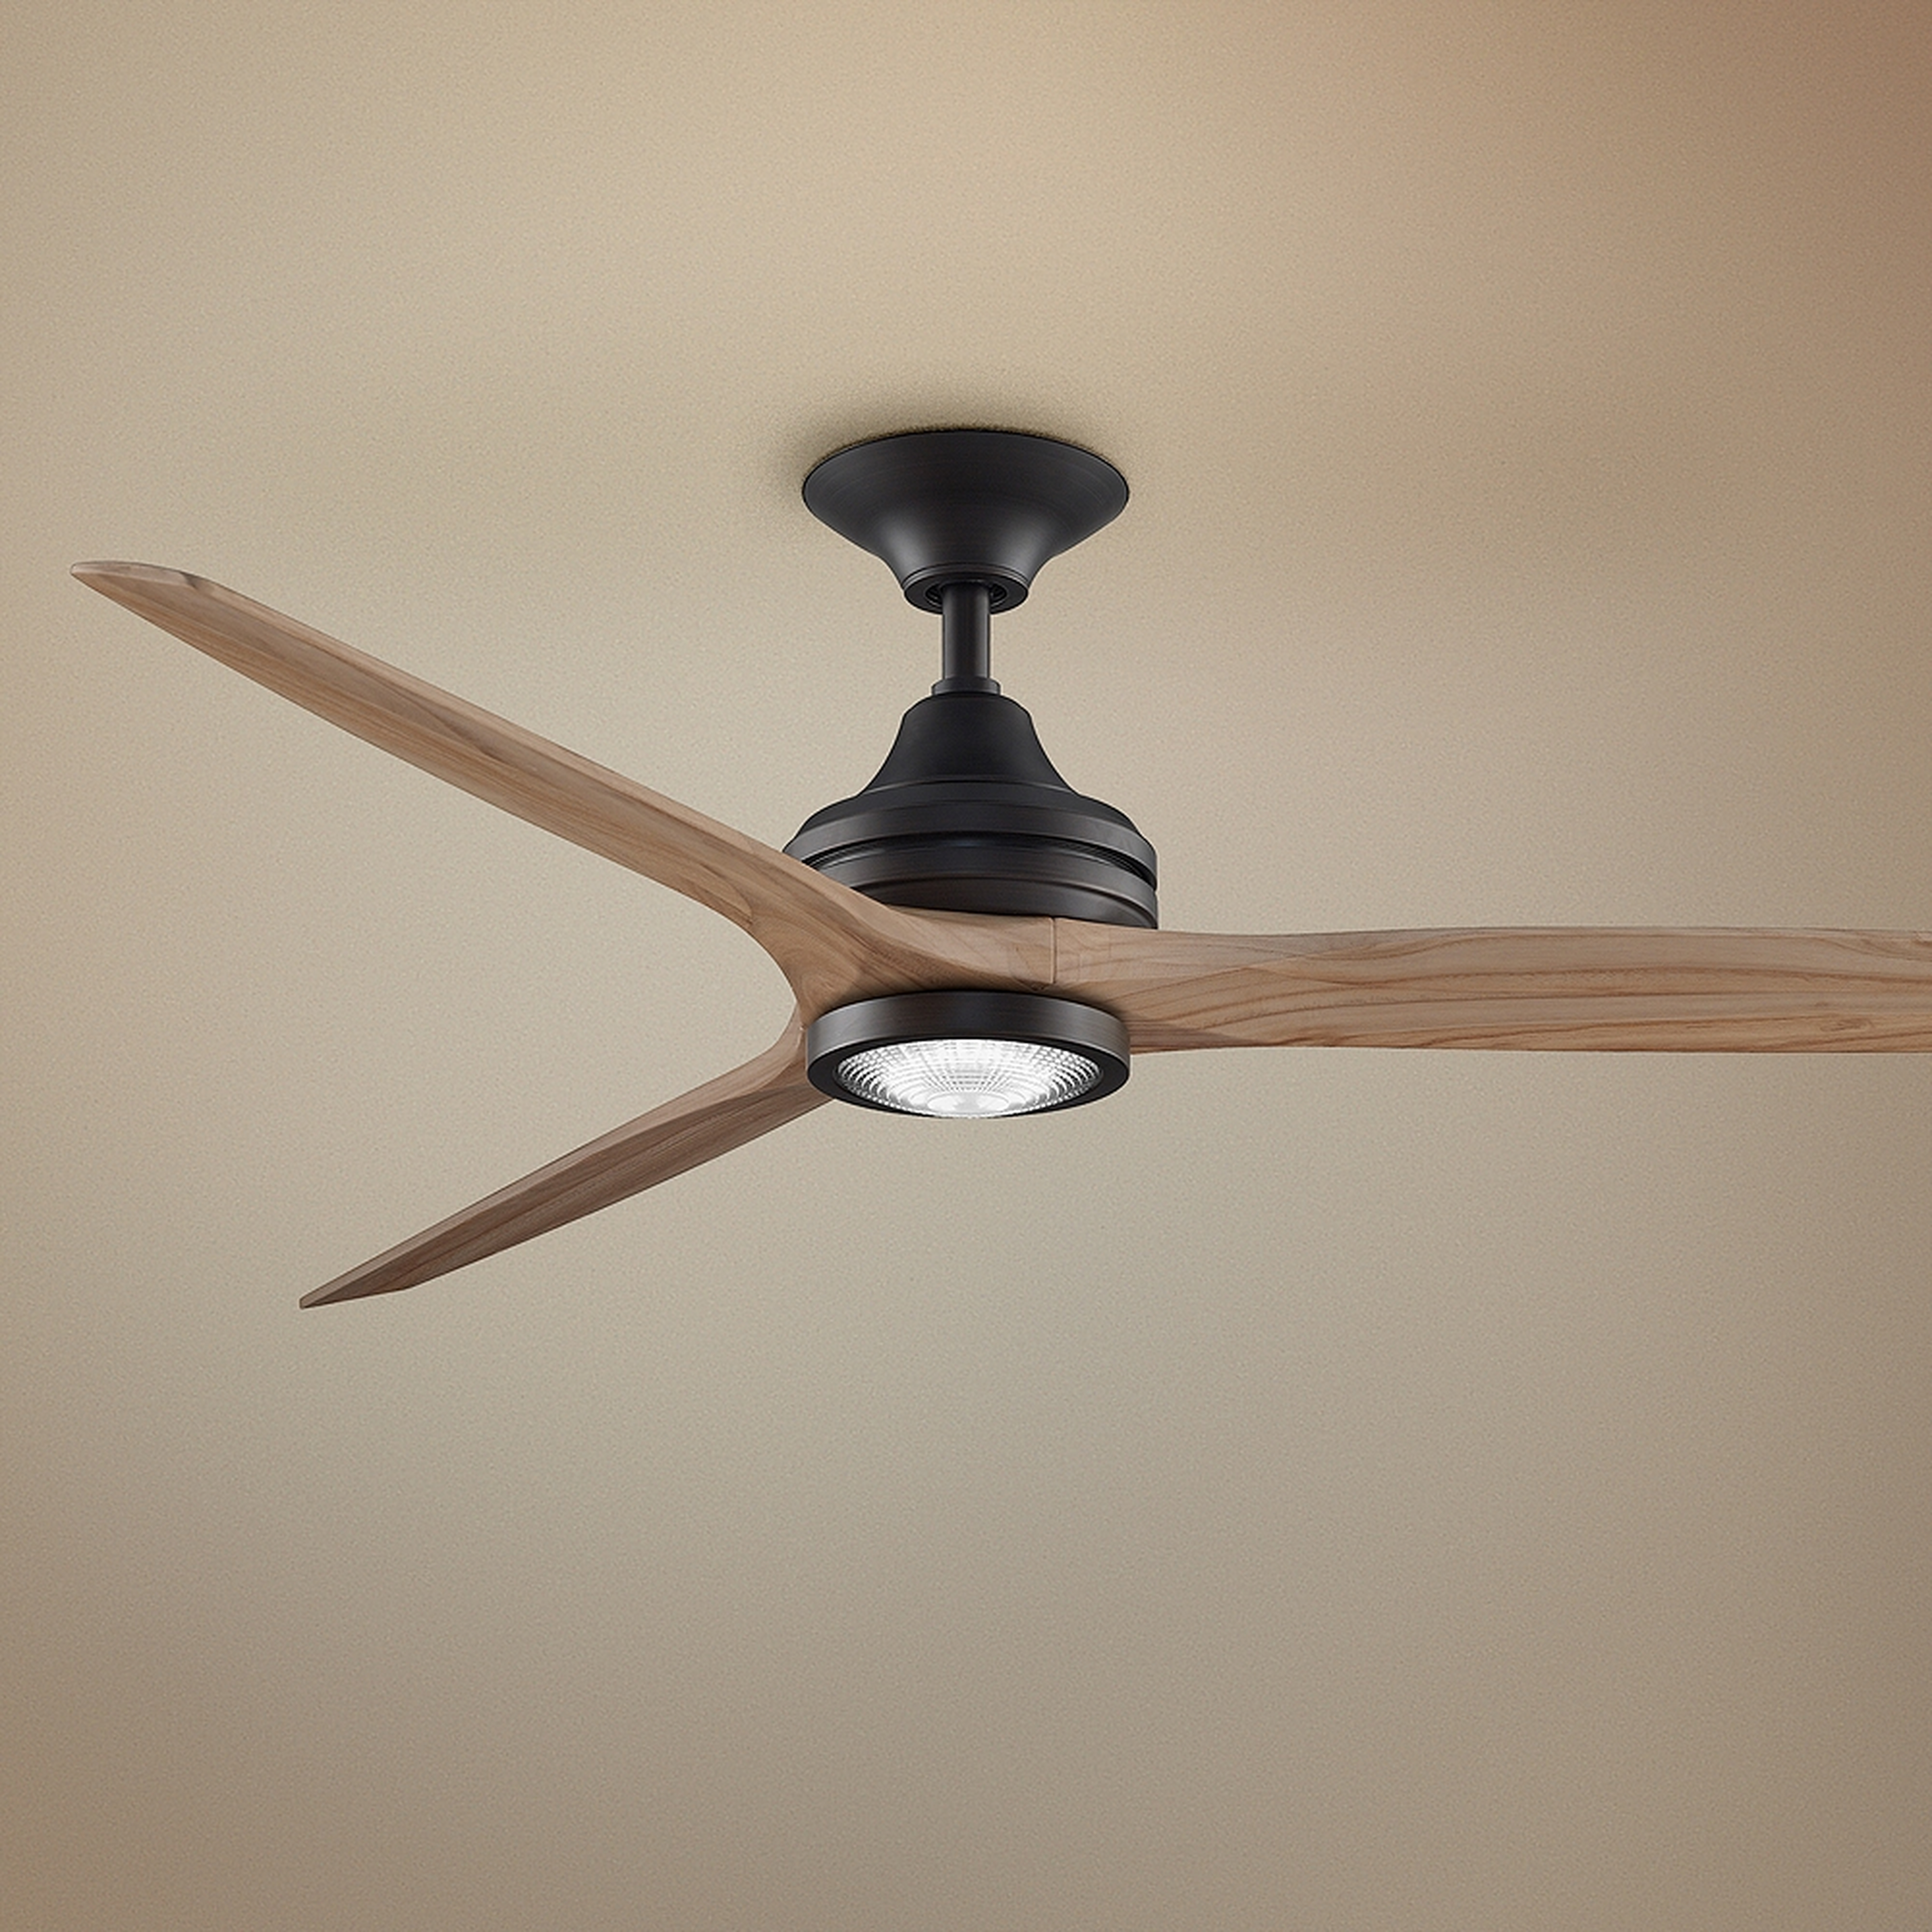 60" Spitfire Dark Bronze and Natural LED Ceiling Fan - Style # 71M51 - Lamps Plus